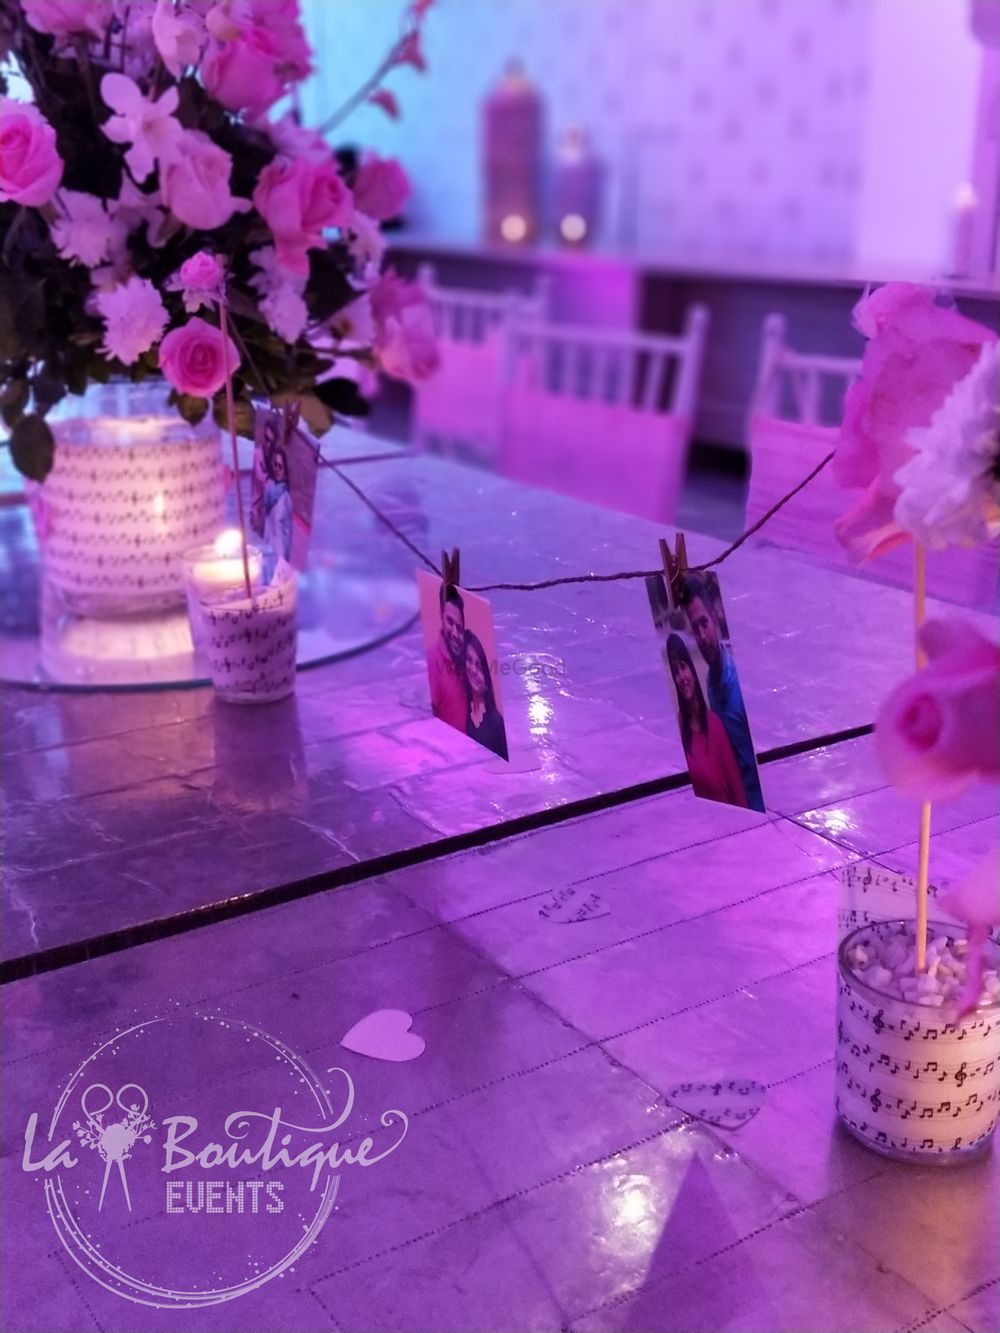 Photo From We Still Do - By La Boutique Events